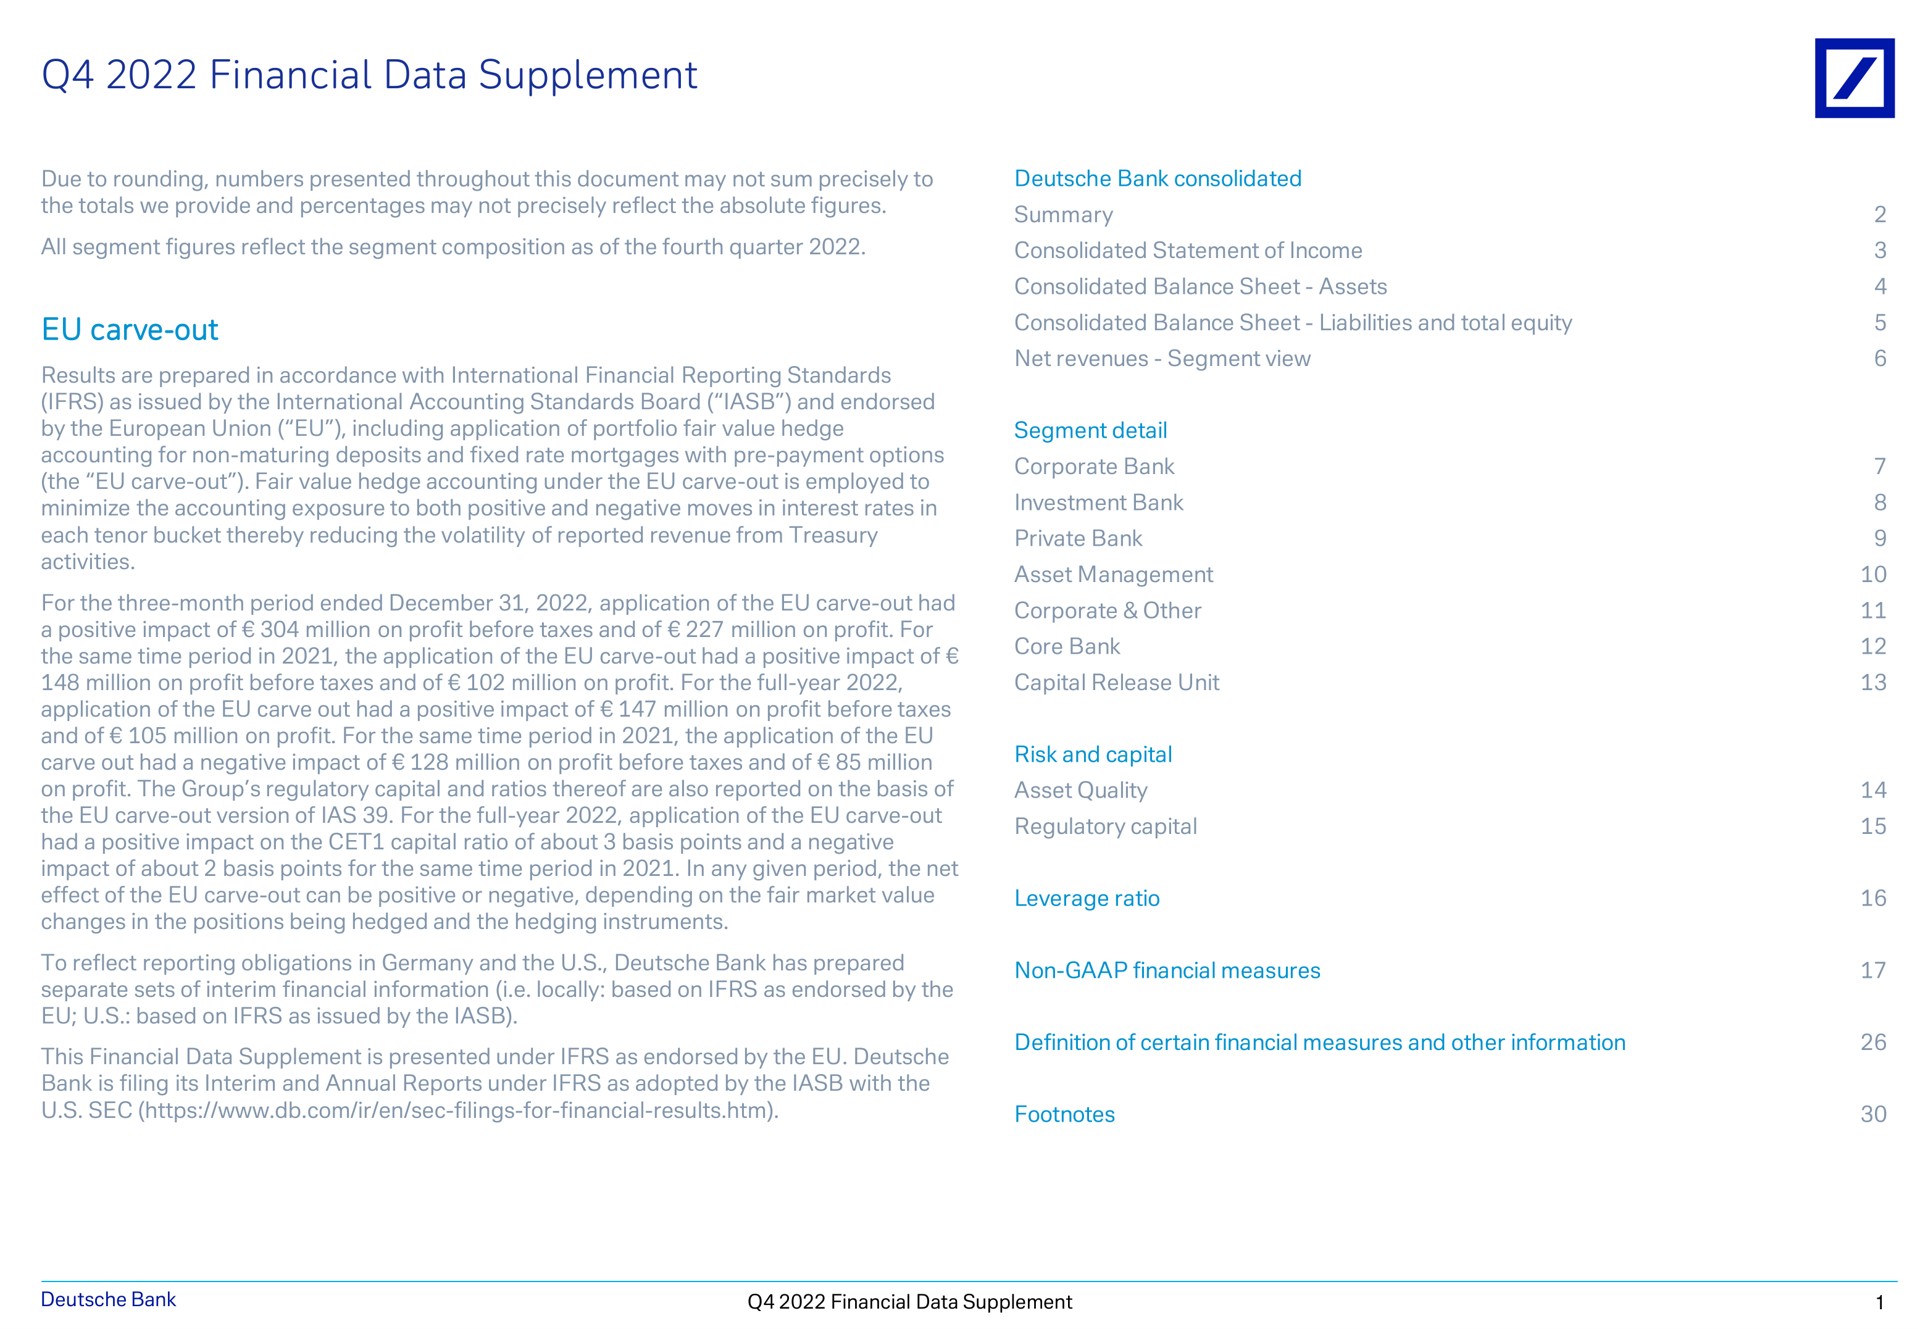 financial data supplement carve out due to rounding numbers presented throughout this document may not sum precisely to the totals we provide and percentages may not precisely reflect the absolute figures all segment figures reflect the segment composition as of the fourth quarter results are prepared in accordance with international reporting standards as issued by the international accounting standards board and endorsed by the union including application of portfolio fair value hedge accounting for non maturing deposits and fixed rate mortgages with payment options the fair value hedge accounting under the is employed to minimize the accounting exposure to both positive and negative moves in interest rates in each tenor bucket thereby reducing the volatility of reported revenue from treasury activities for the three month period ended application of the had a positive impact of million on profit before taxes and of million on profit for the same time period in the application of the had a positive impact of million on profit before taxes and of million on profit for the full year application of the carve out had a positive impact of million on profit before taxes and of million on profit for the same time period in the application of the carve out had a negative impact of million on profit before taxes and of million on profit the group regulatory capital and ratios thereof are also reported on the basis of the version of for the full year application of the had a positive impact on the capital ratio of about basis points and a negative impact of about basis points for the same time period in in any given period the net effect of the can be positive or negative depending on the fair market value changes in the positions being hedged and the hedging instruments to reflect reporting obligations in and the bank has prepared separate sets of interim information i locally based on as endorsed by the based on as issued by the this is presented under as endorsed by the bank is filing its interim and annual reports under as adopted by the with the sec bank consolidated summary consolidated statement of income consolidated balance sheet assets consolidated balance sheet liabilities and total equity net revenues segment view segment detail corporate bank investment bank private bank asset management corporate other core bank capital release unit risk and capital asset quality regulatory capital leverage ratio non measures definition of certain measures and other information footnotes bank | Deutsche Bank